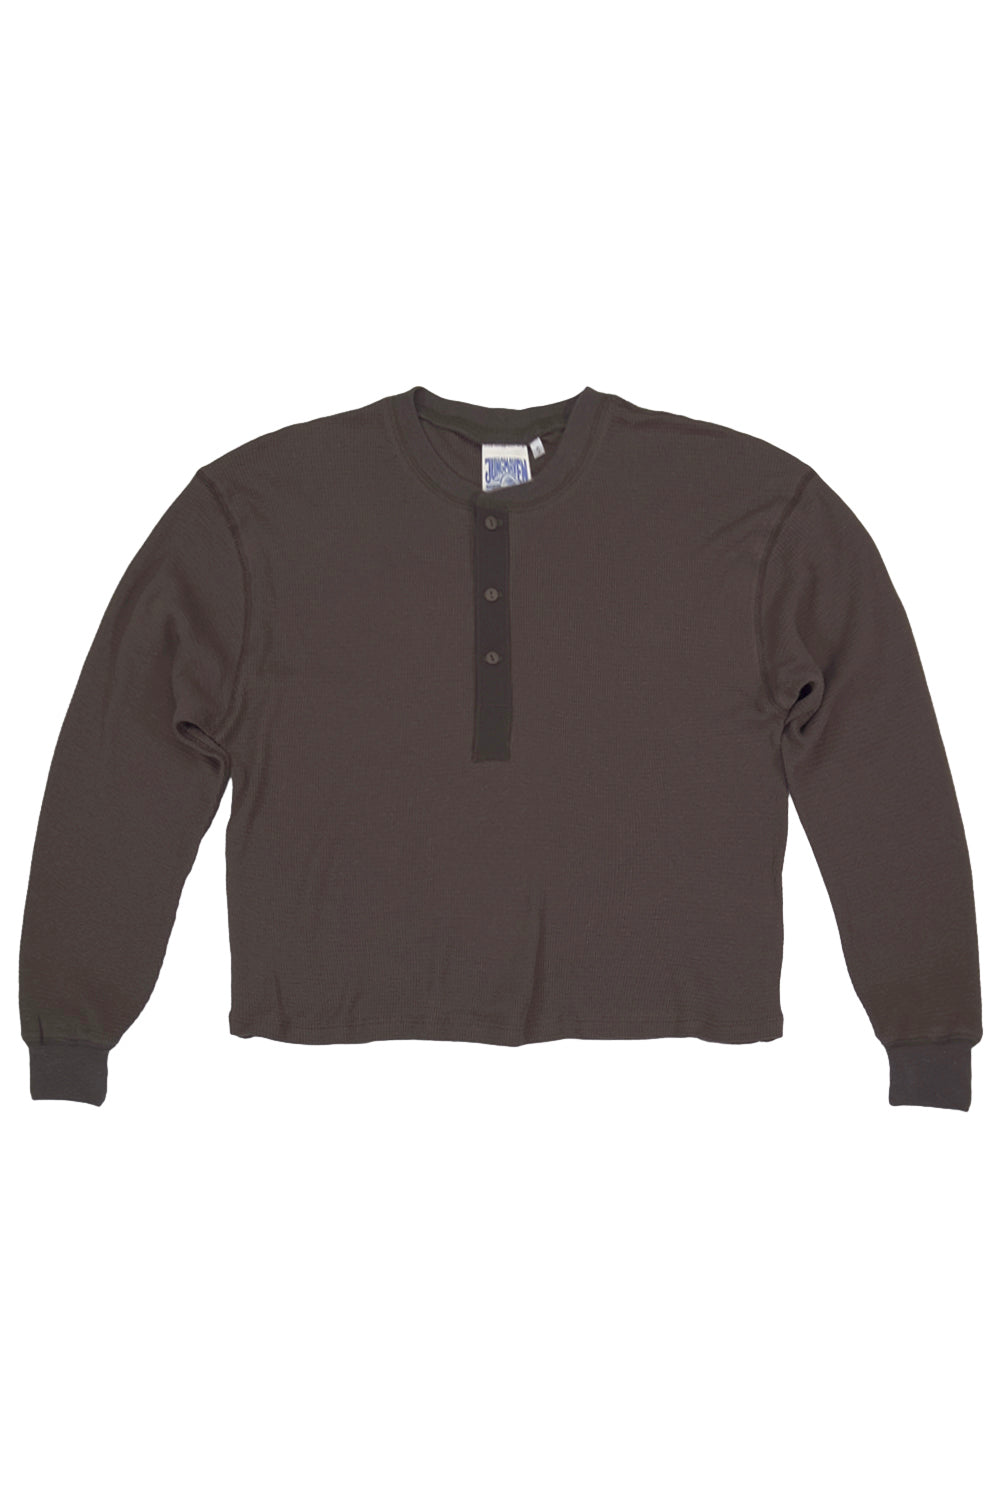 Mesa Cropped Thermal Henley | Jungmaven Hemp Clothing & Accessories / Color:Coffee Bean